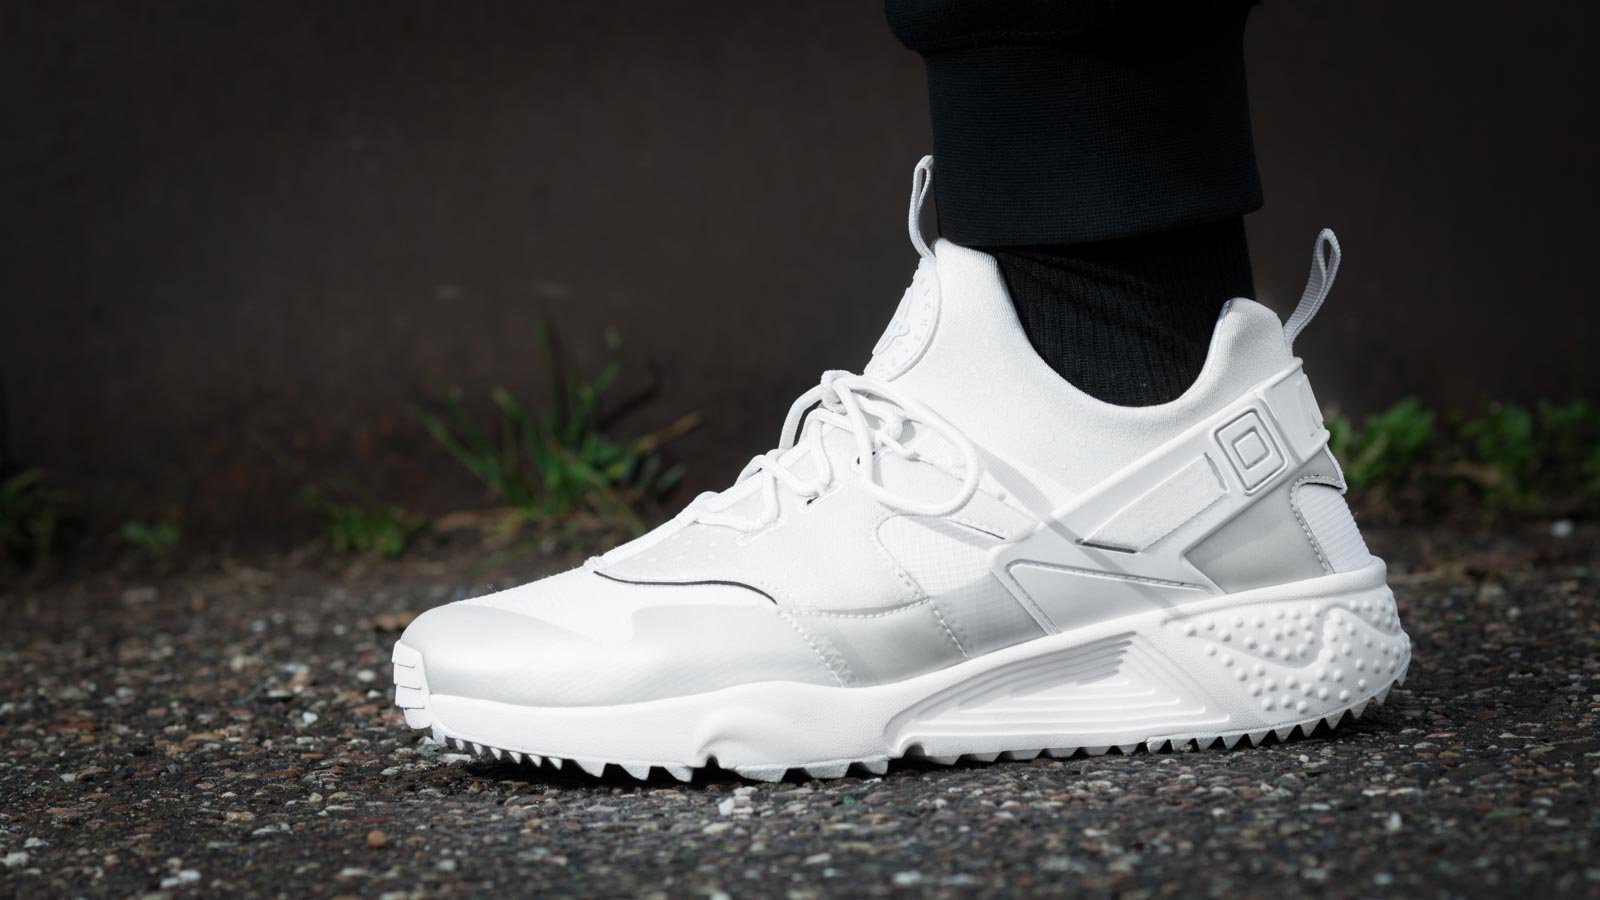 Foot Locker EU on Twitter: "Find your street essential in the #Nike #Air # Huarache Utility coming in Pure Platinum and White this https://t.co/84dUxB9g4T" / Twitter